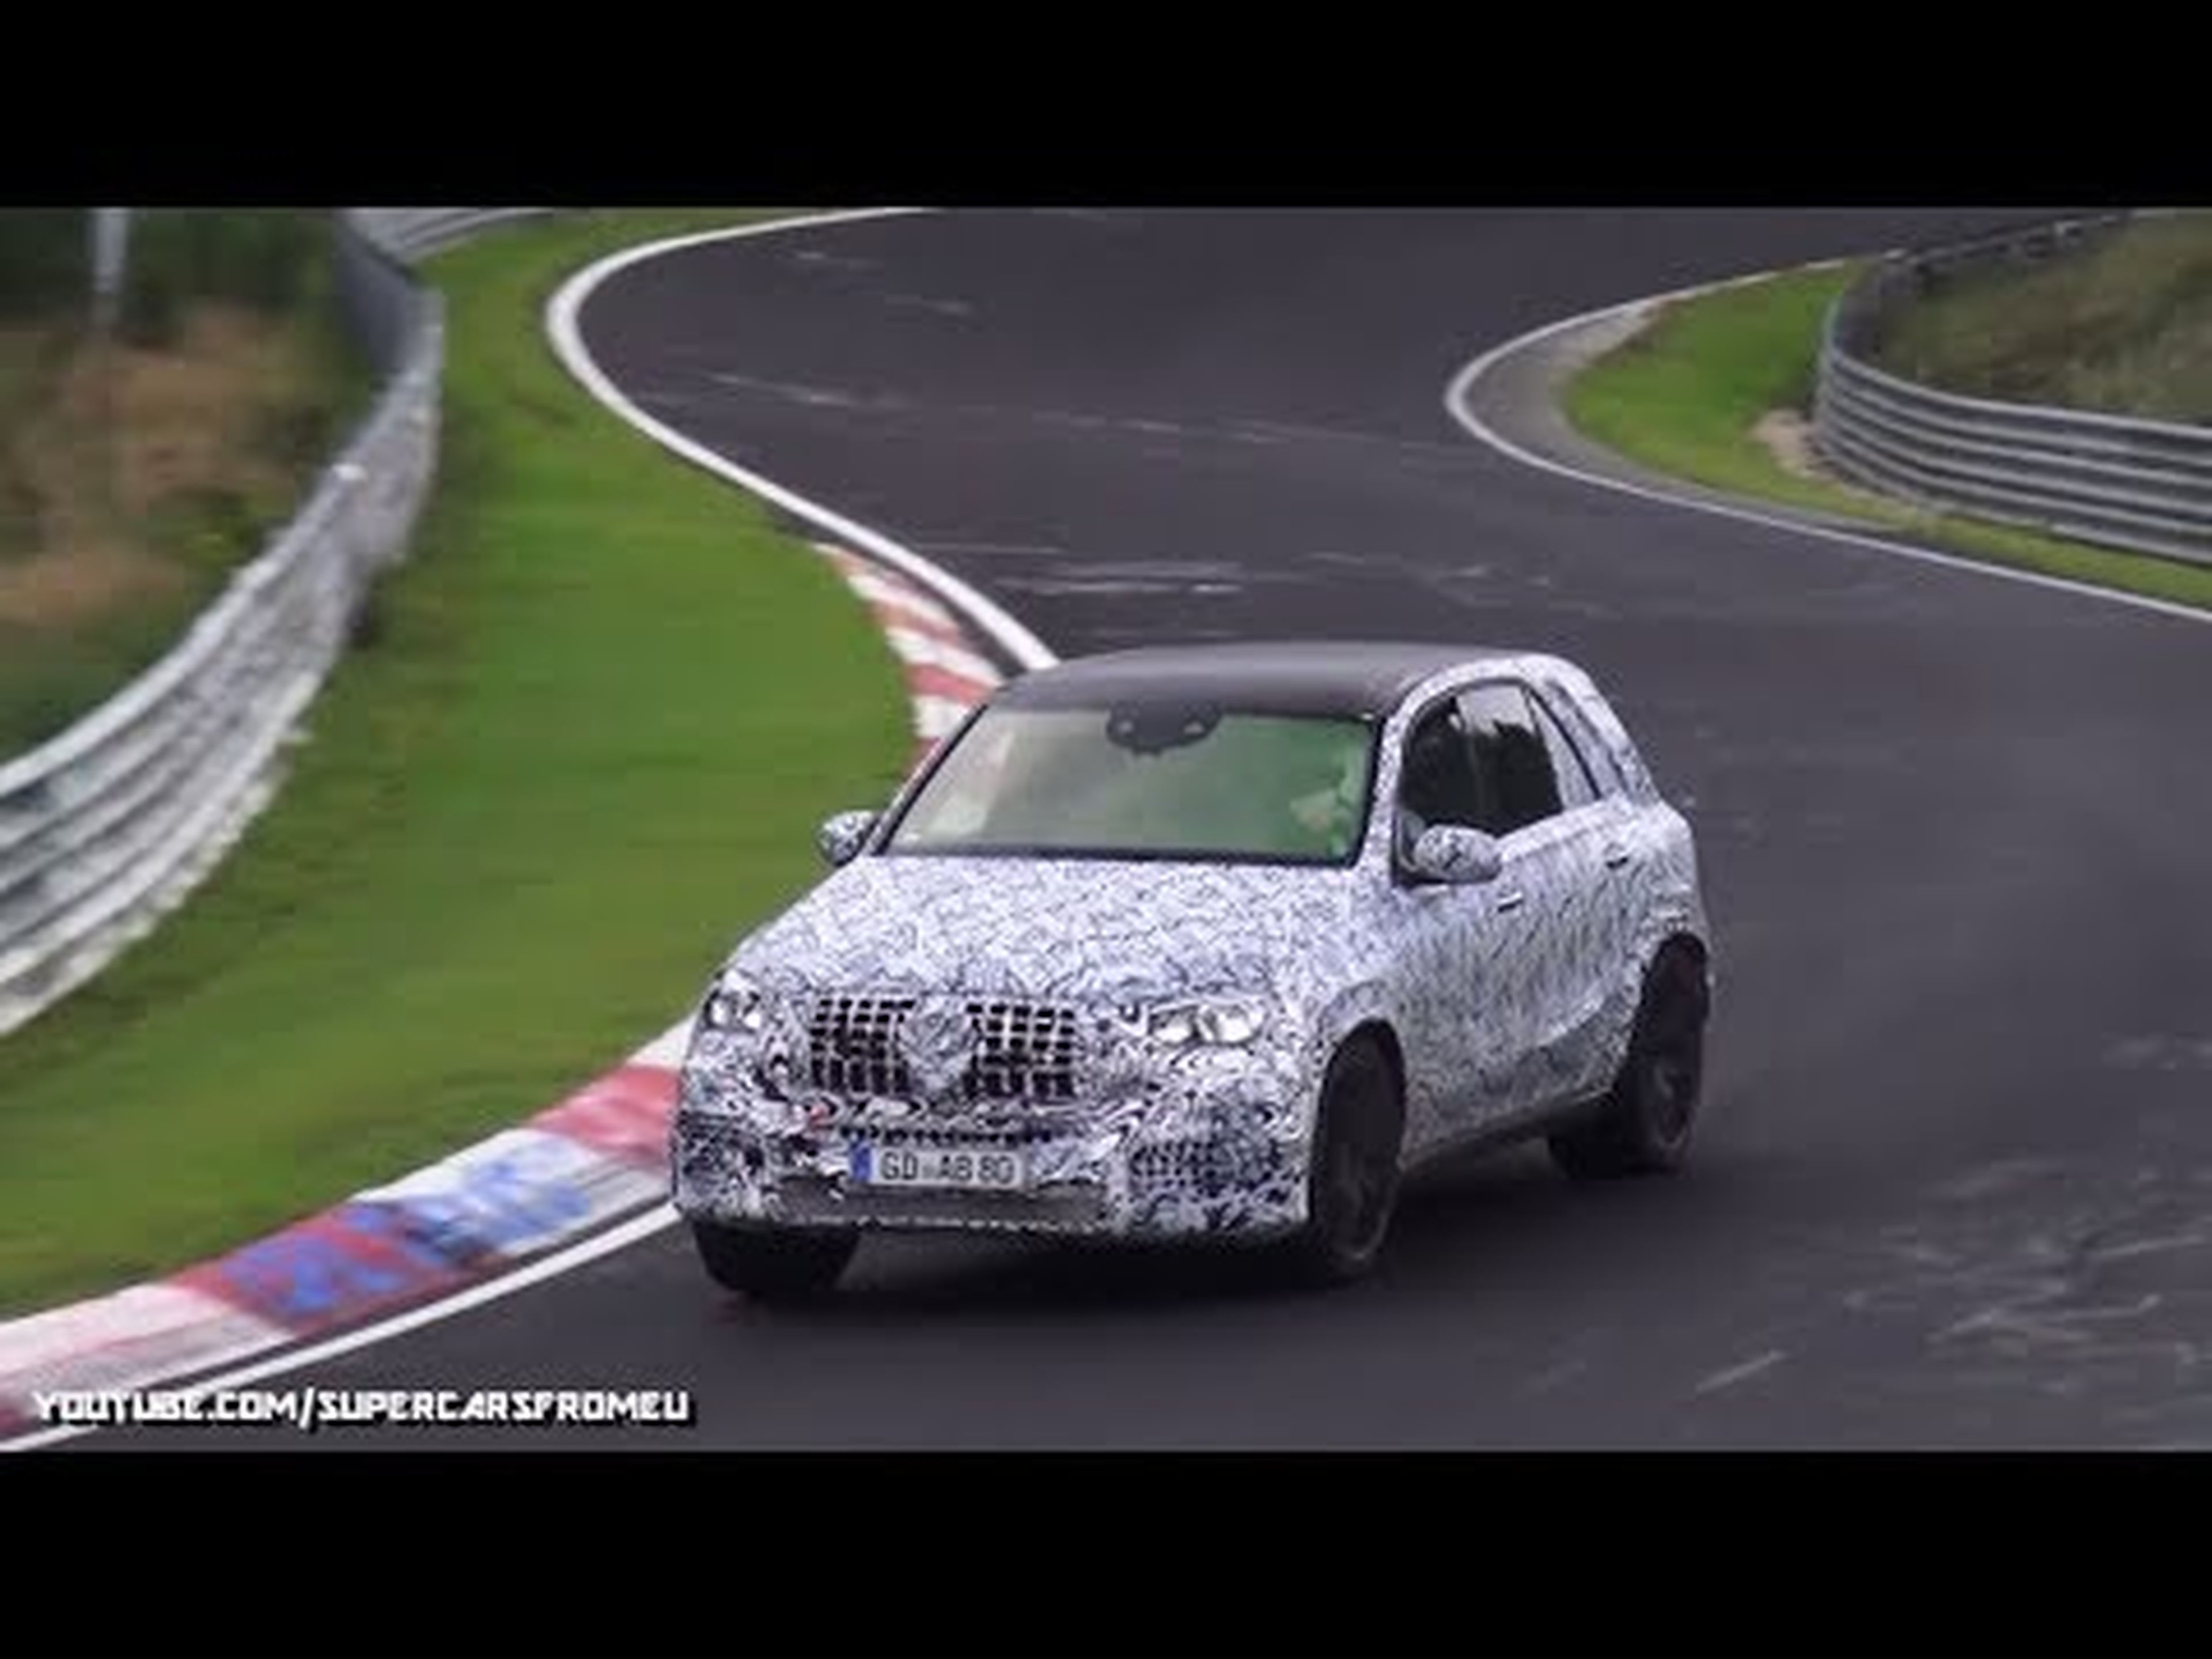 2019 Mercedes GLE 63 AMG Spied testing on the Nurburgring, Nordschleife!